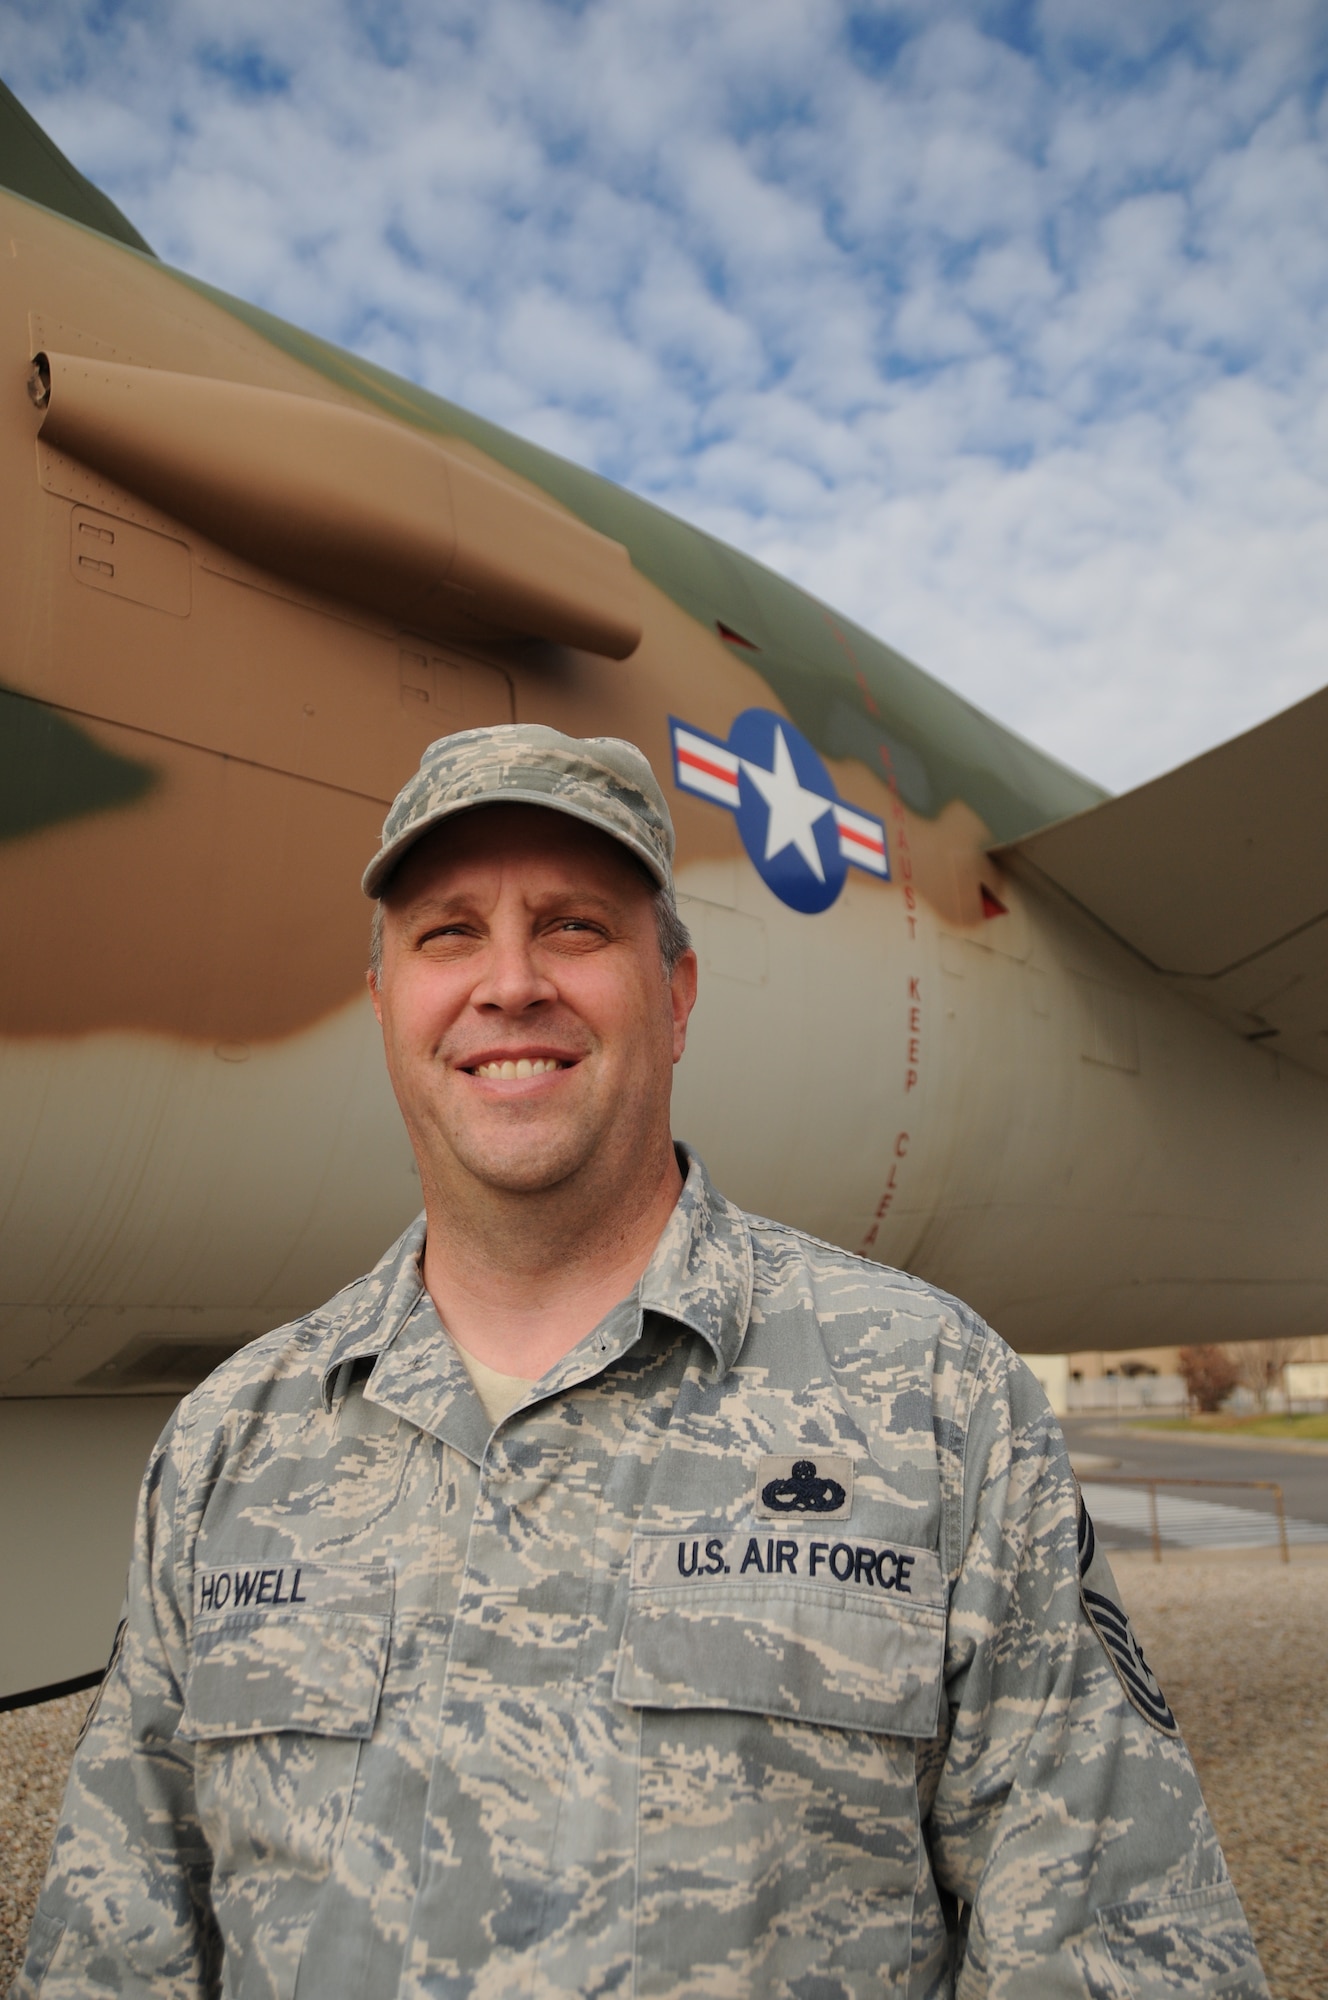 Senior Master Sgt. Mark Howell, 419th Maintenance Squadron avionics flight chief, stands in front of a static airplane here at Hill Air Force Base, Utah. Howell is the new wing representative for the Employer Support of the Guard and Reserve and aims to educate the wing about the ESGR. (U.S. Air Force photo/Staff Sgt. Heather Skinkle)